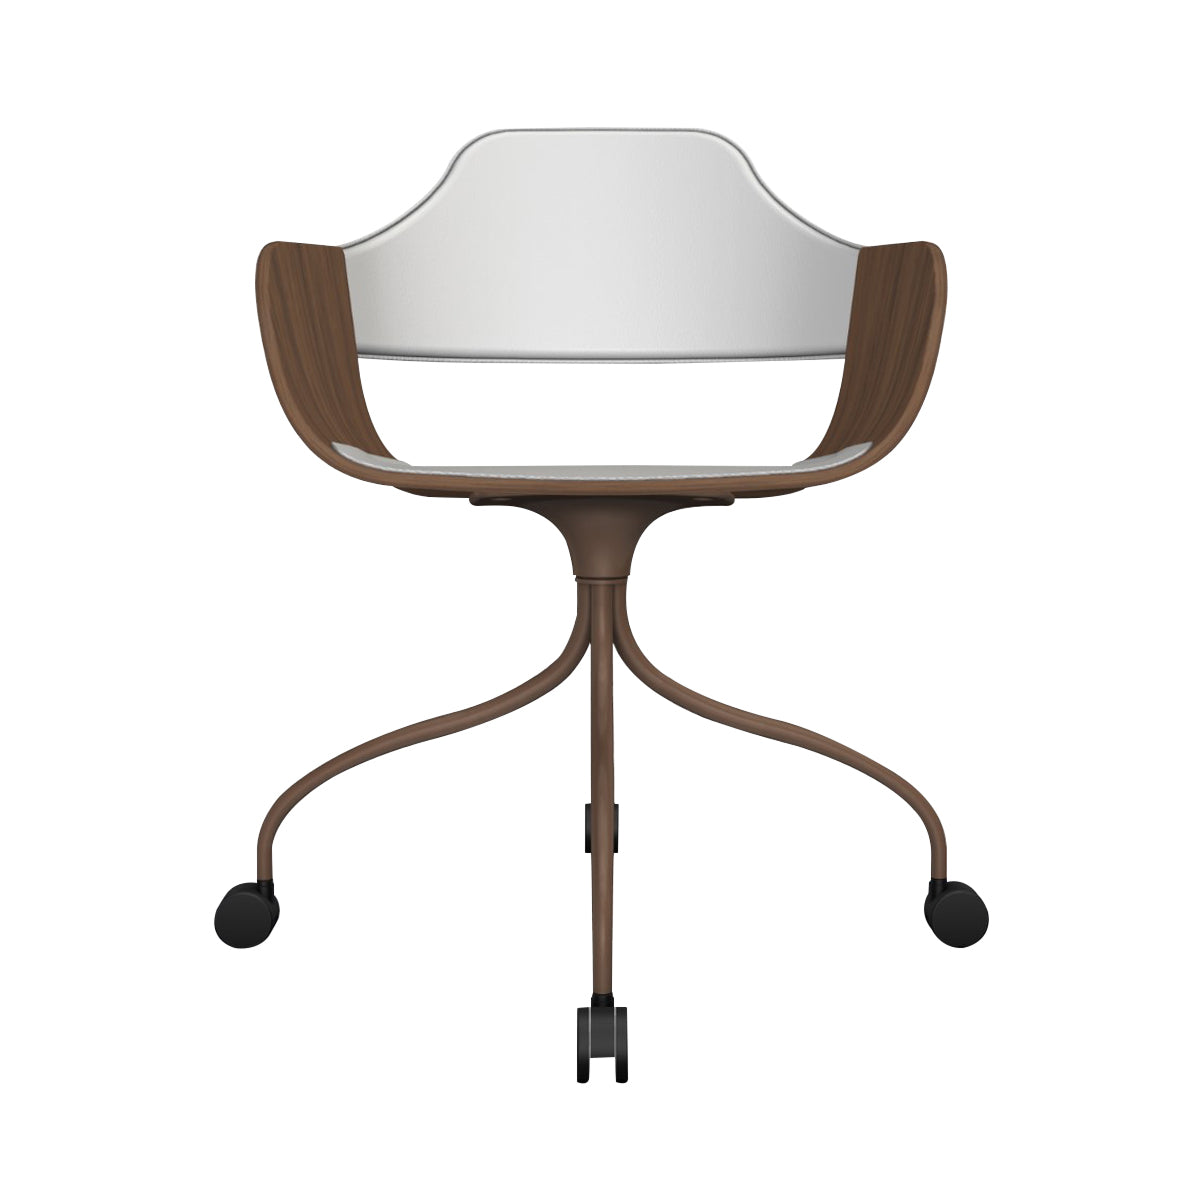 Showtime Chair with Wheel: Seat + Backrest Upholstered + Pale Brown